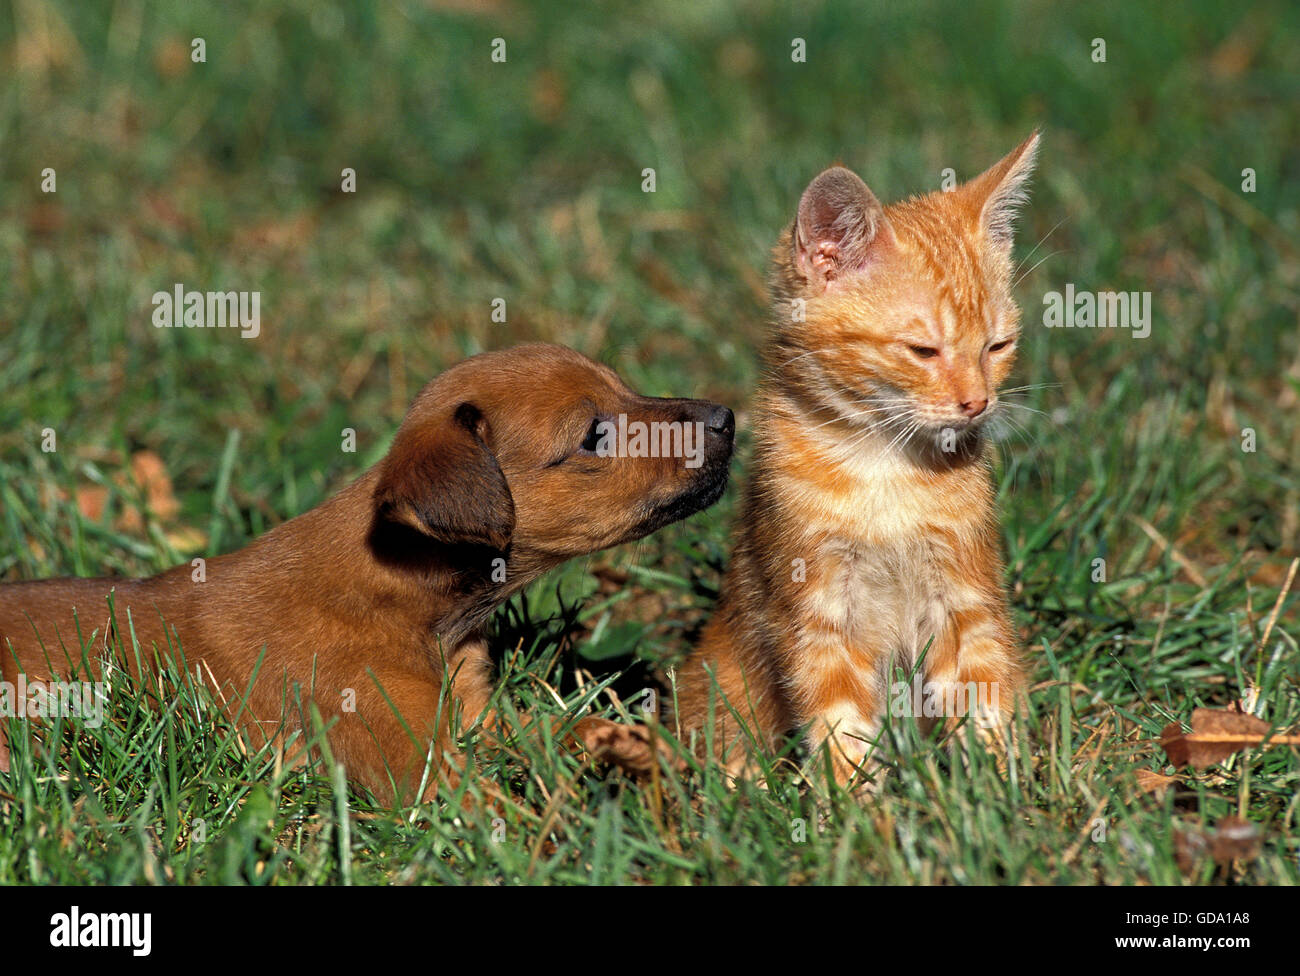 Pup with Red Tabby Domestic Cat on Grass Stock Photo